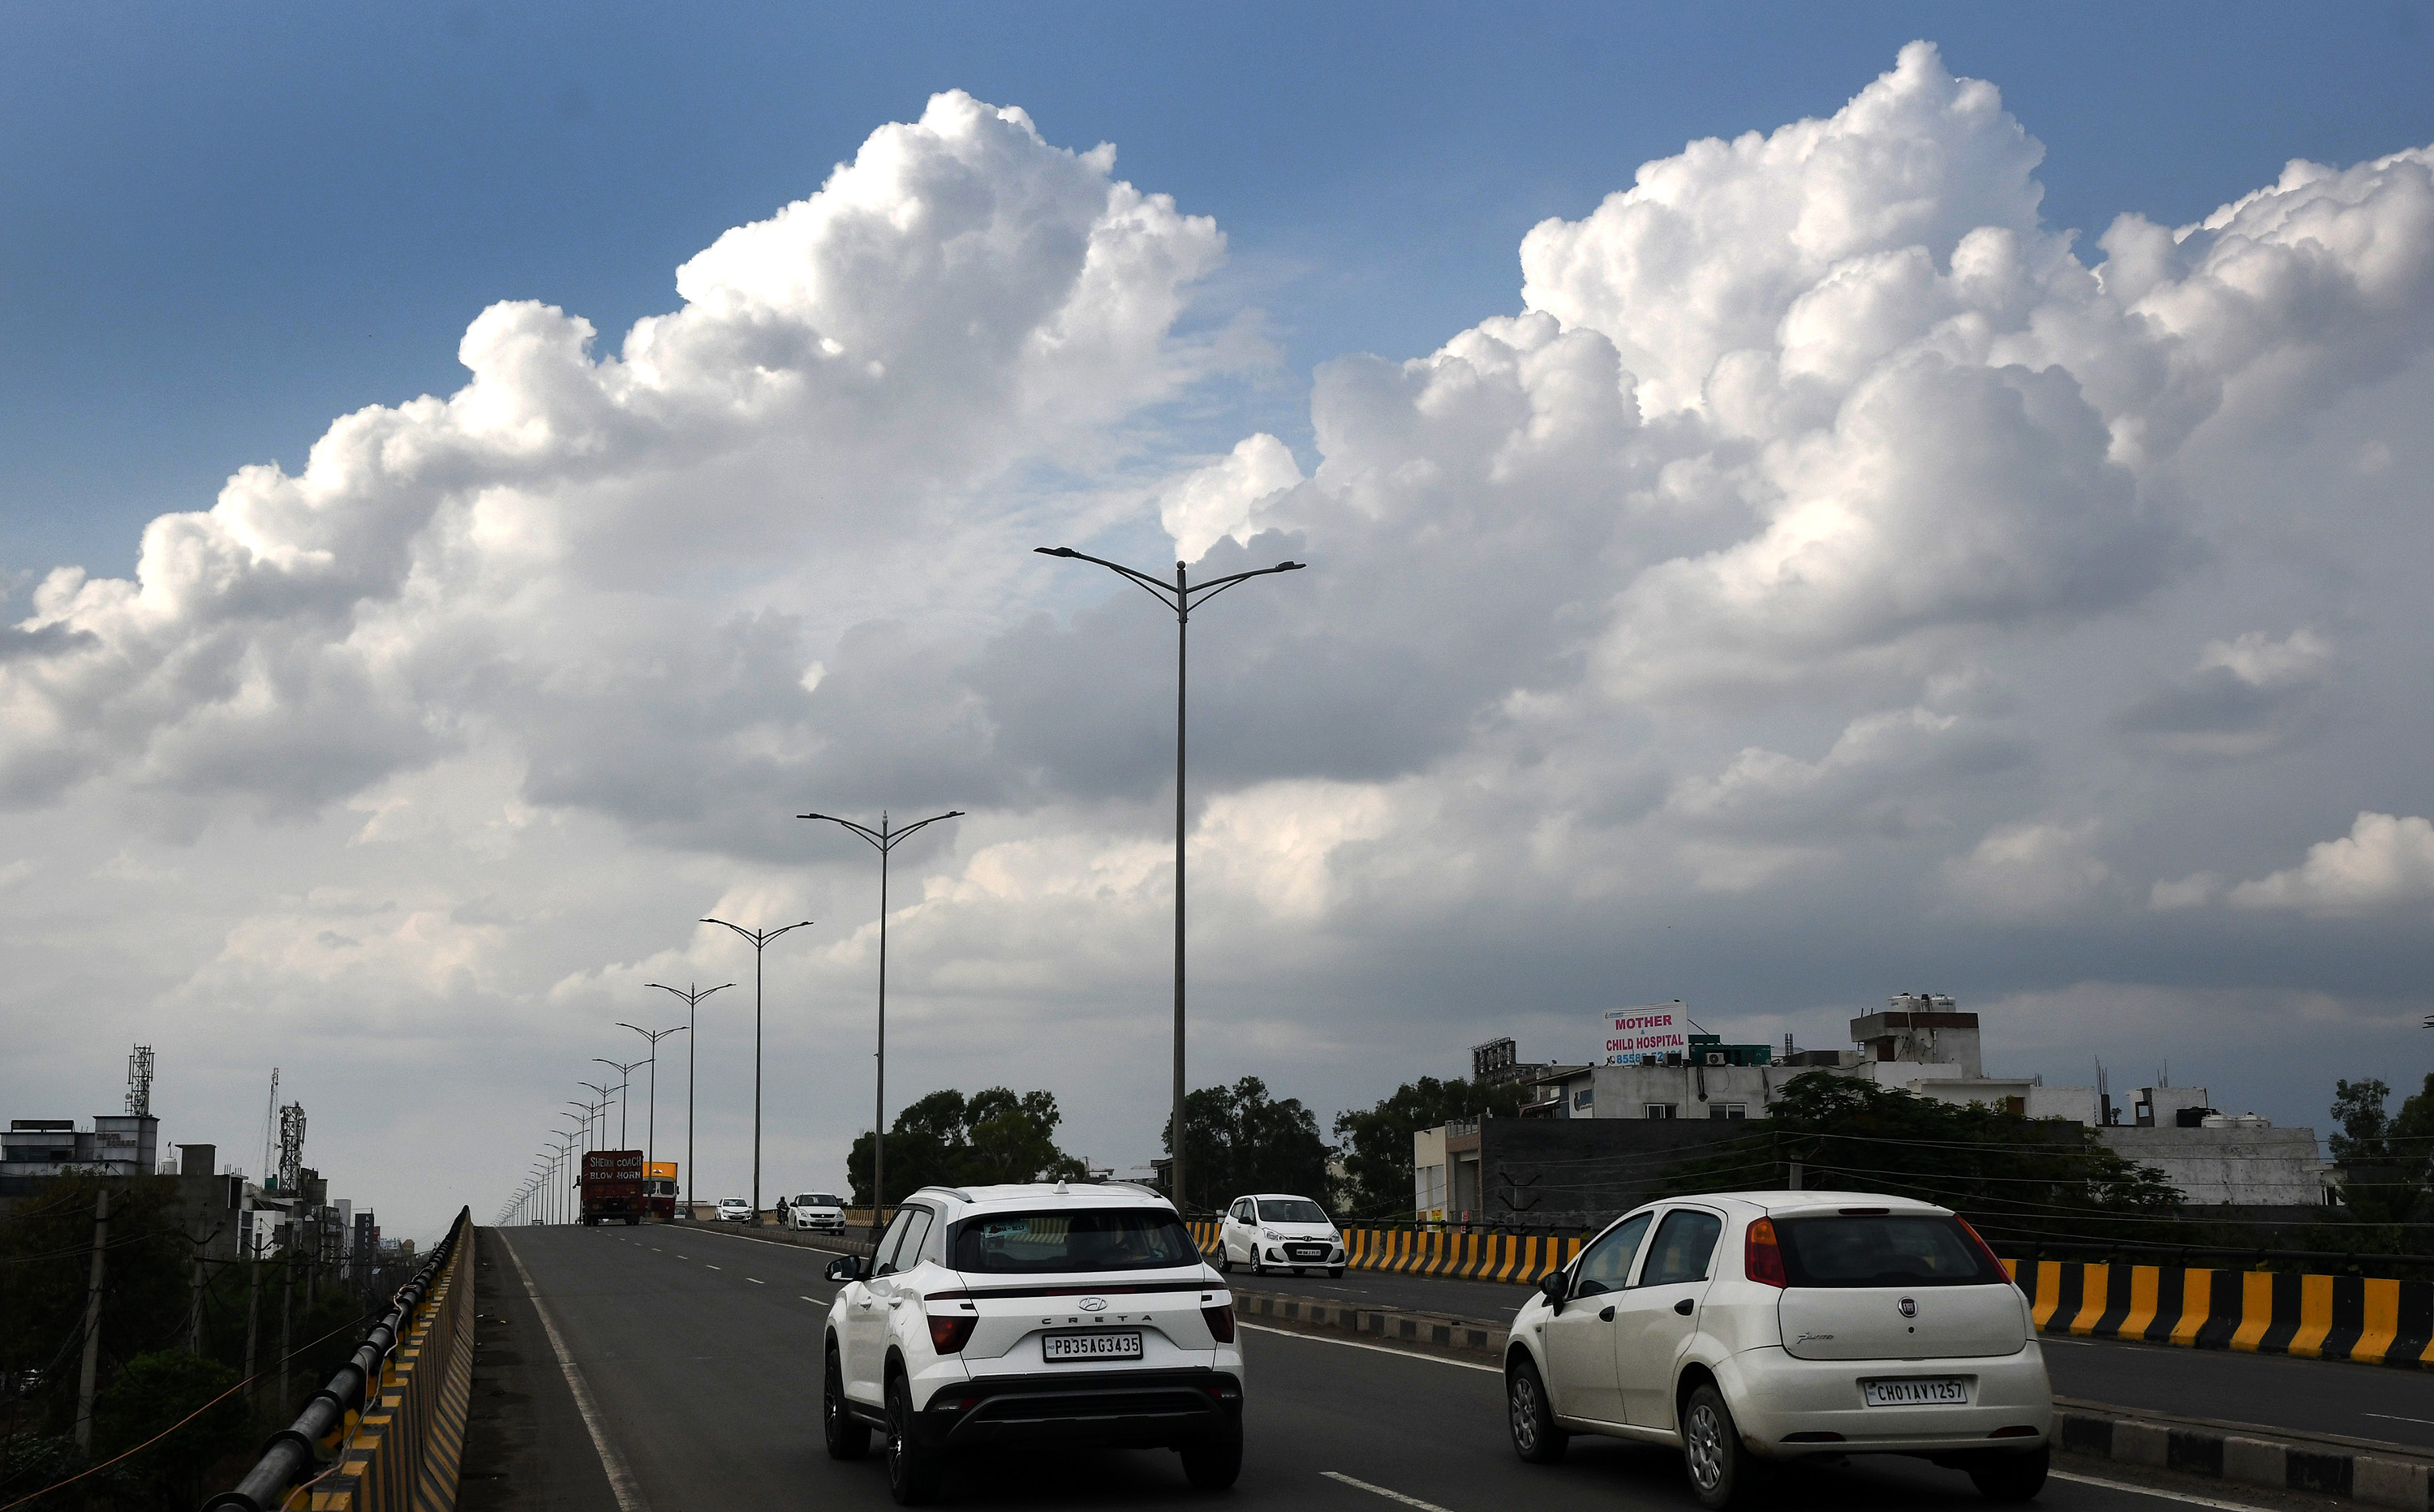 Chandigarh sees coldest day of season with maximum temperature 8.5°C below normal